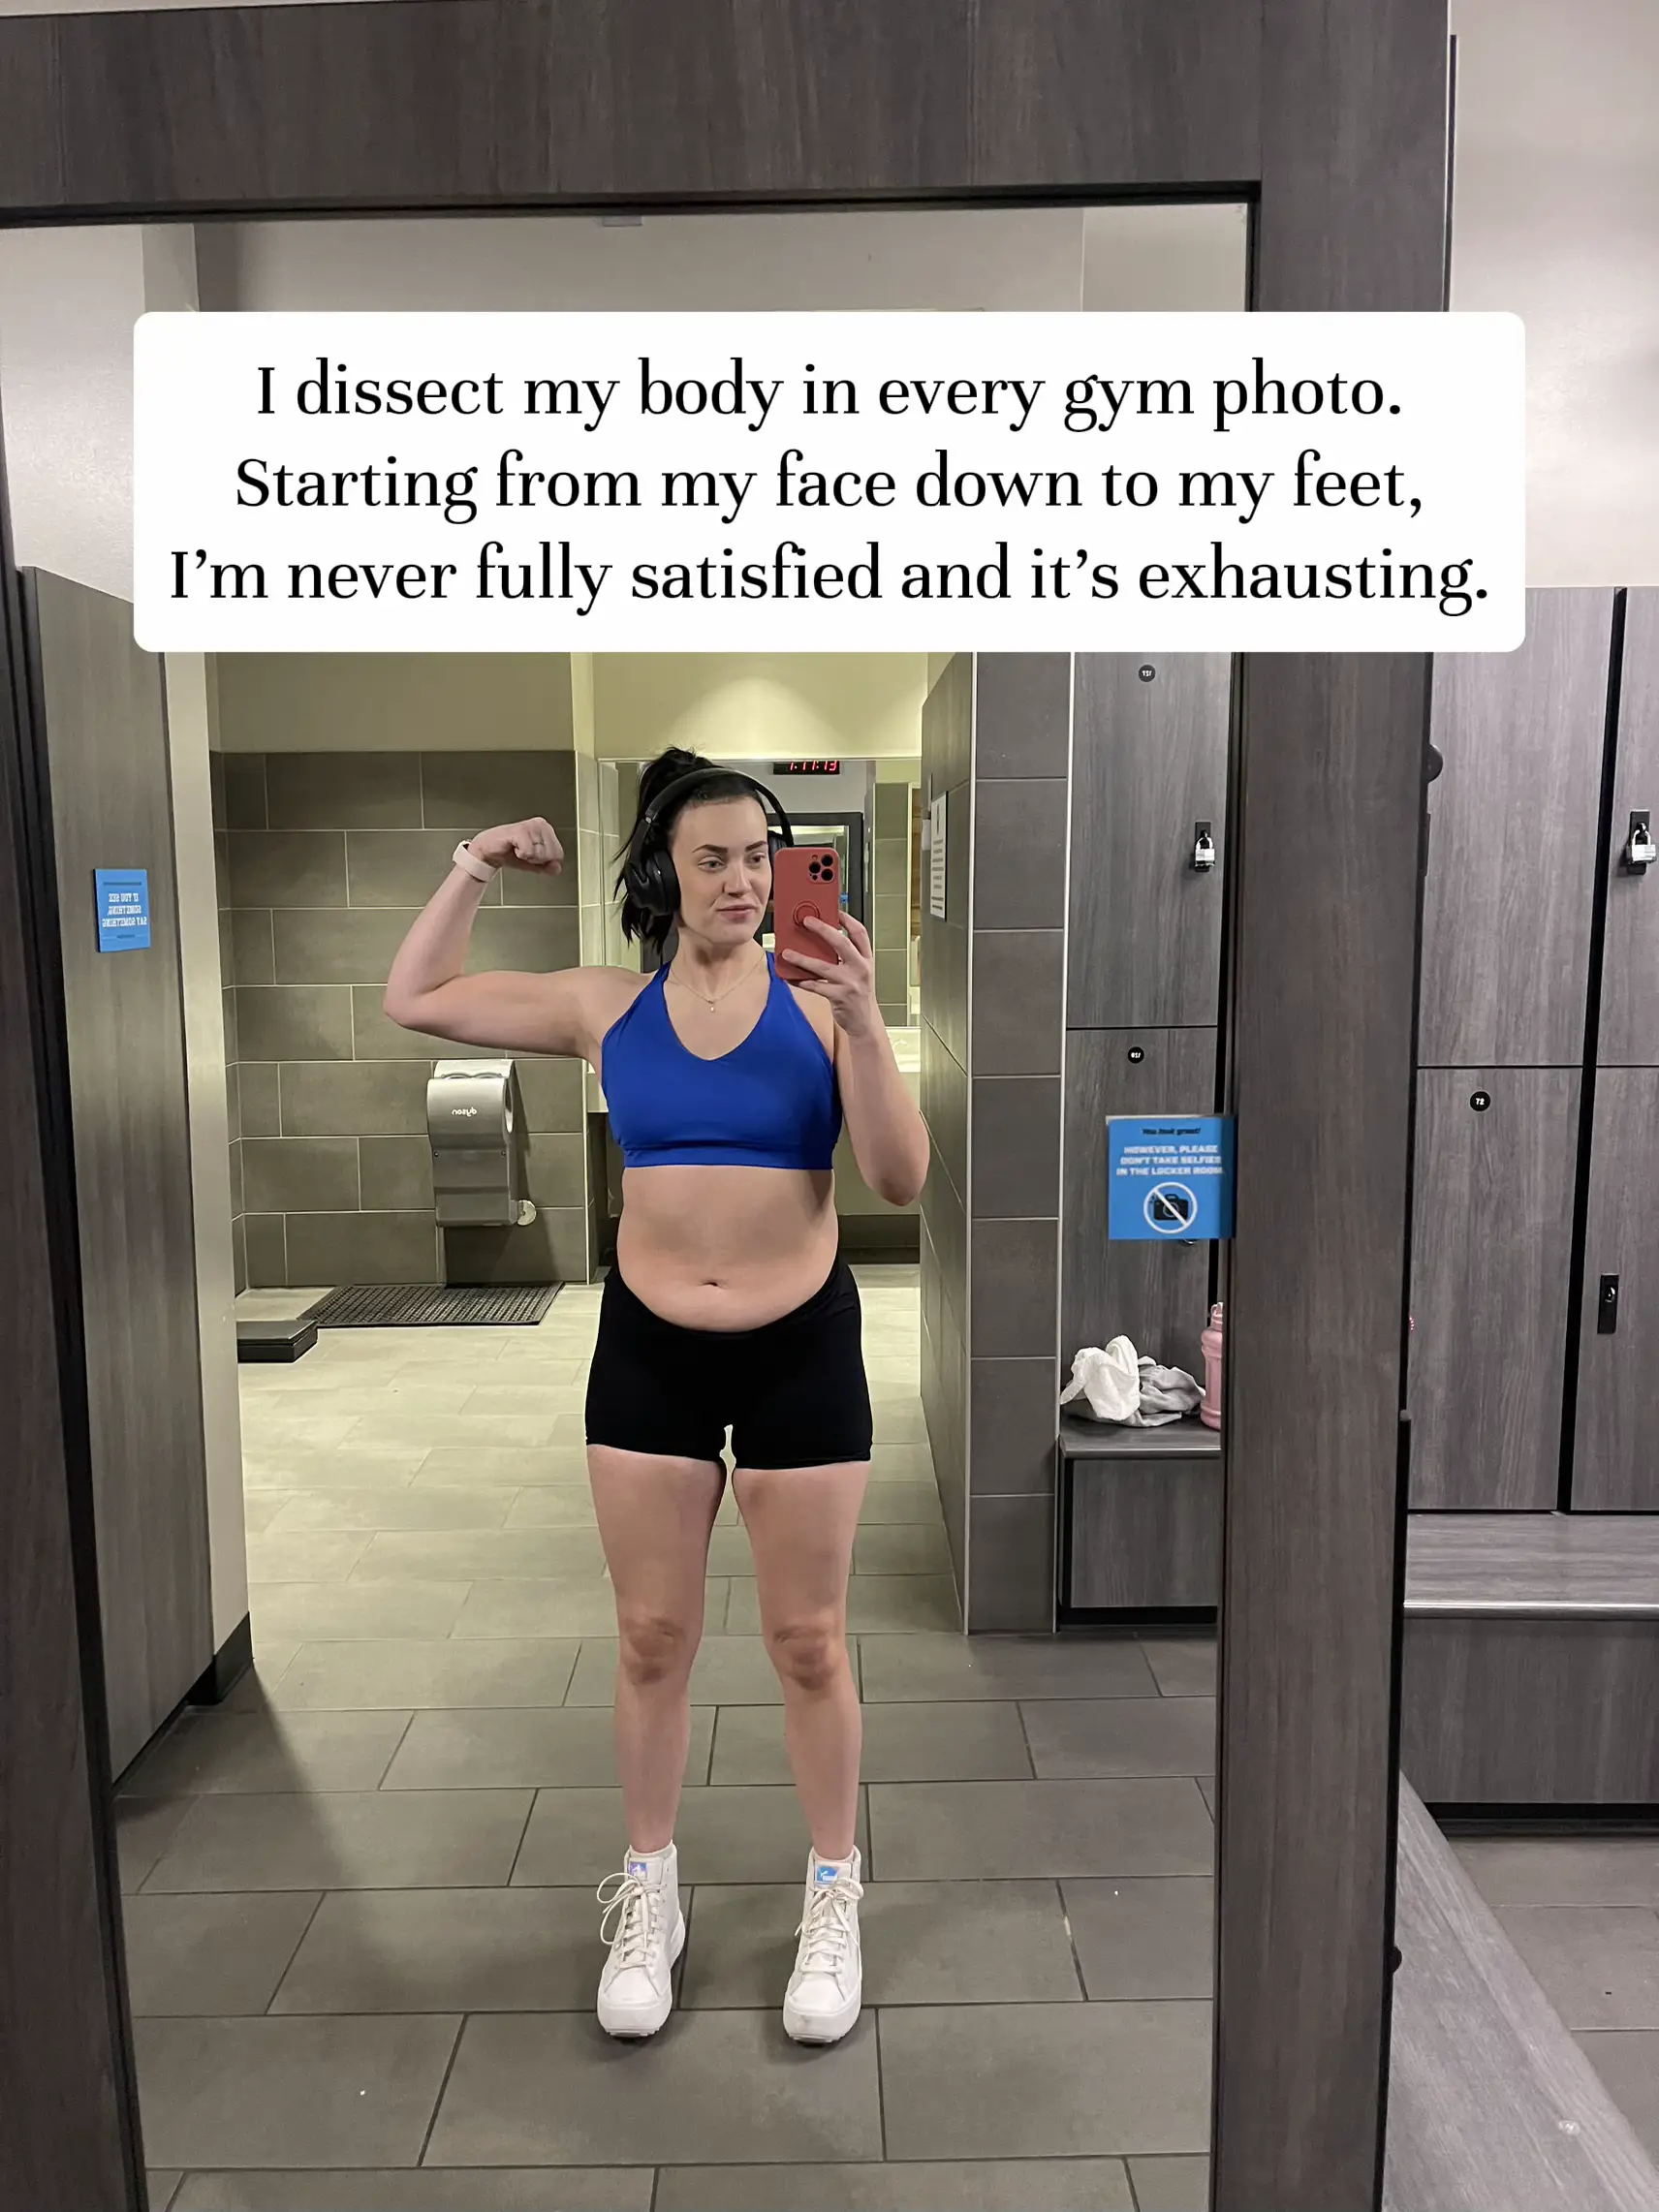  A woman in a gym taking a selfie.